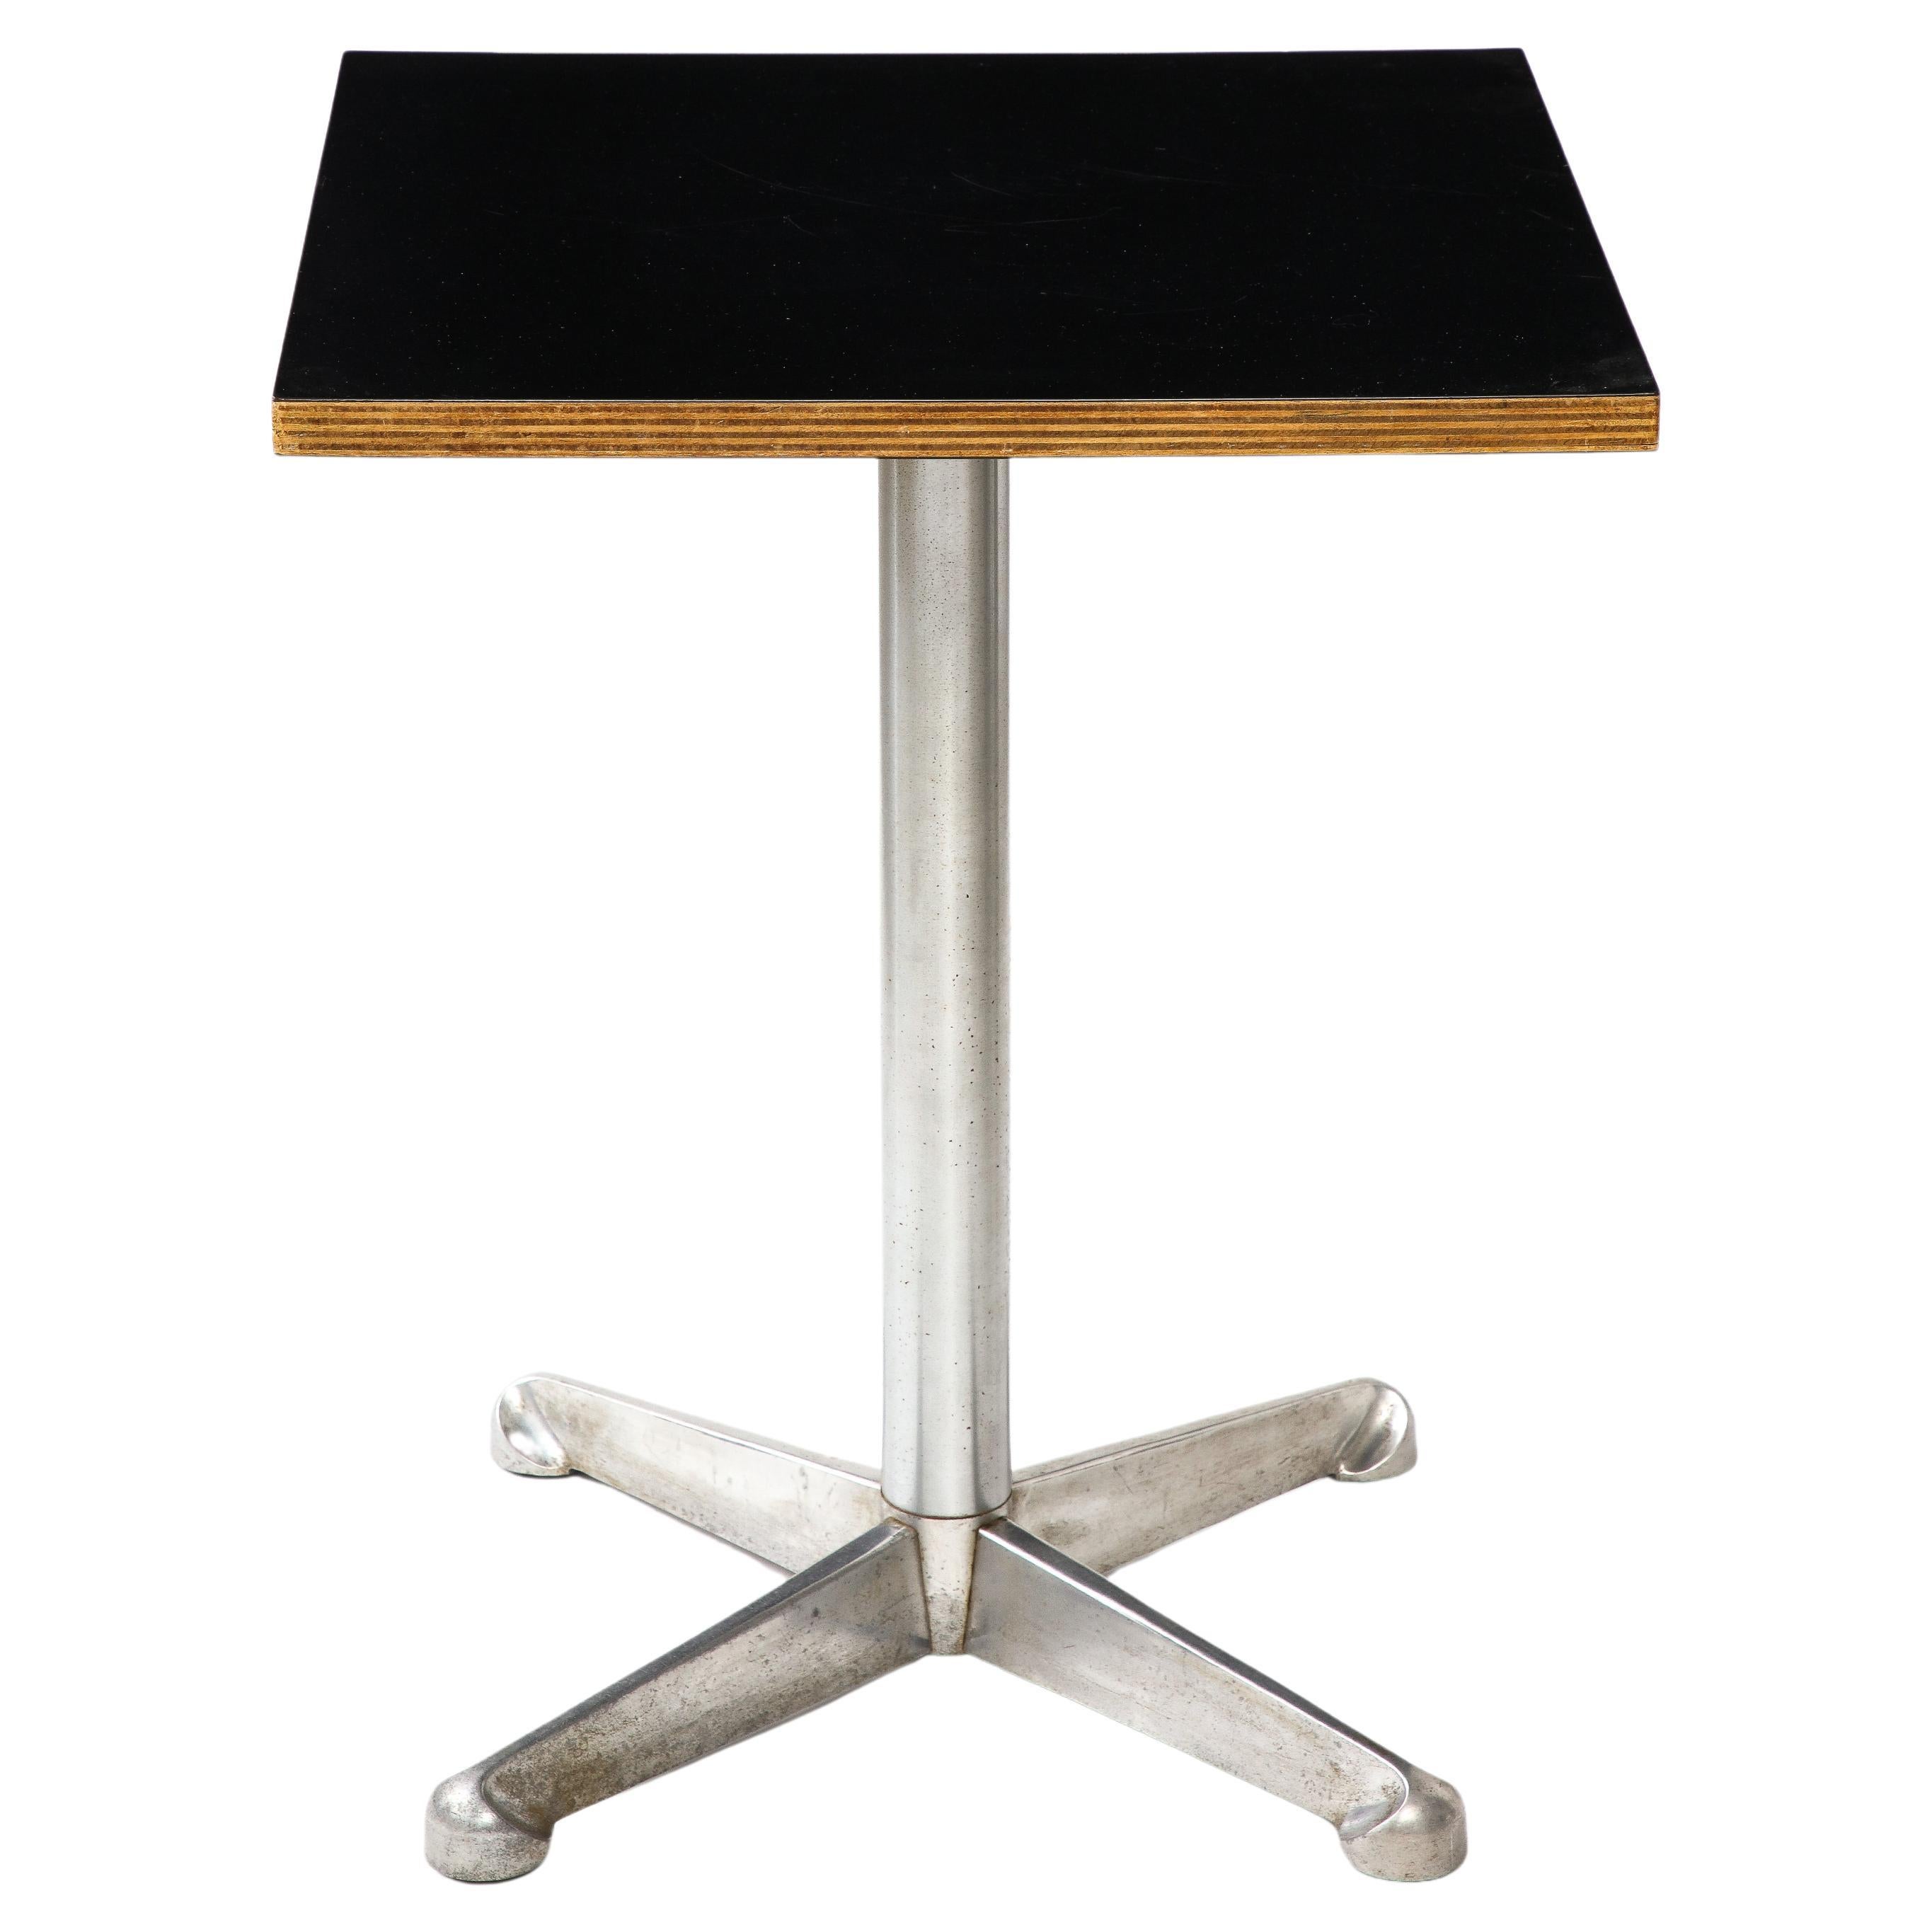 Steel and Laminate Side Table by Tecno, Italy, c. 1960 For Sale